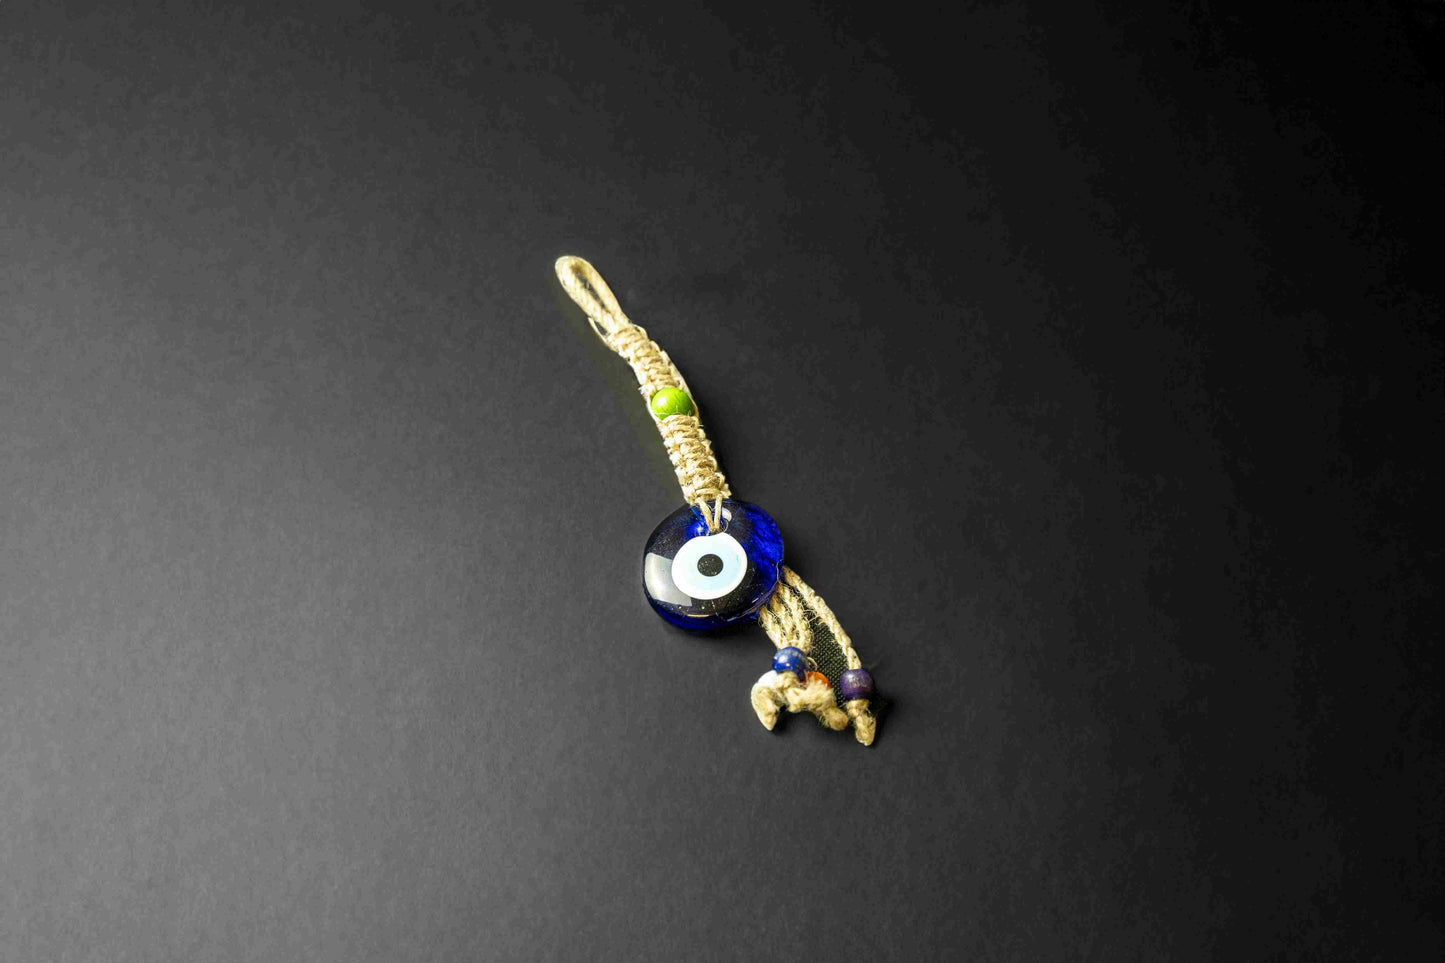 This 5cm hanging evil eye is a great way to harness the protective power of ancient mythology and ward off negative energy. Its unique design is used to safeguard your home and draw positive energy, helping you create a safe and welcoming environment. "Th